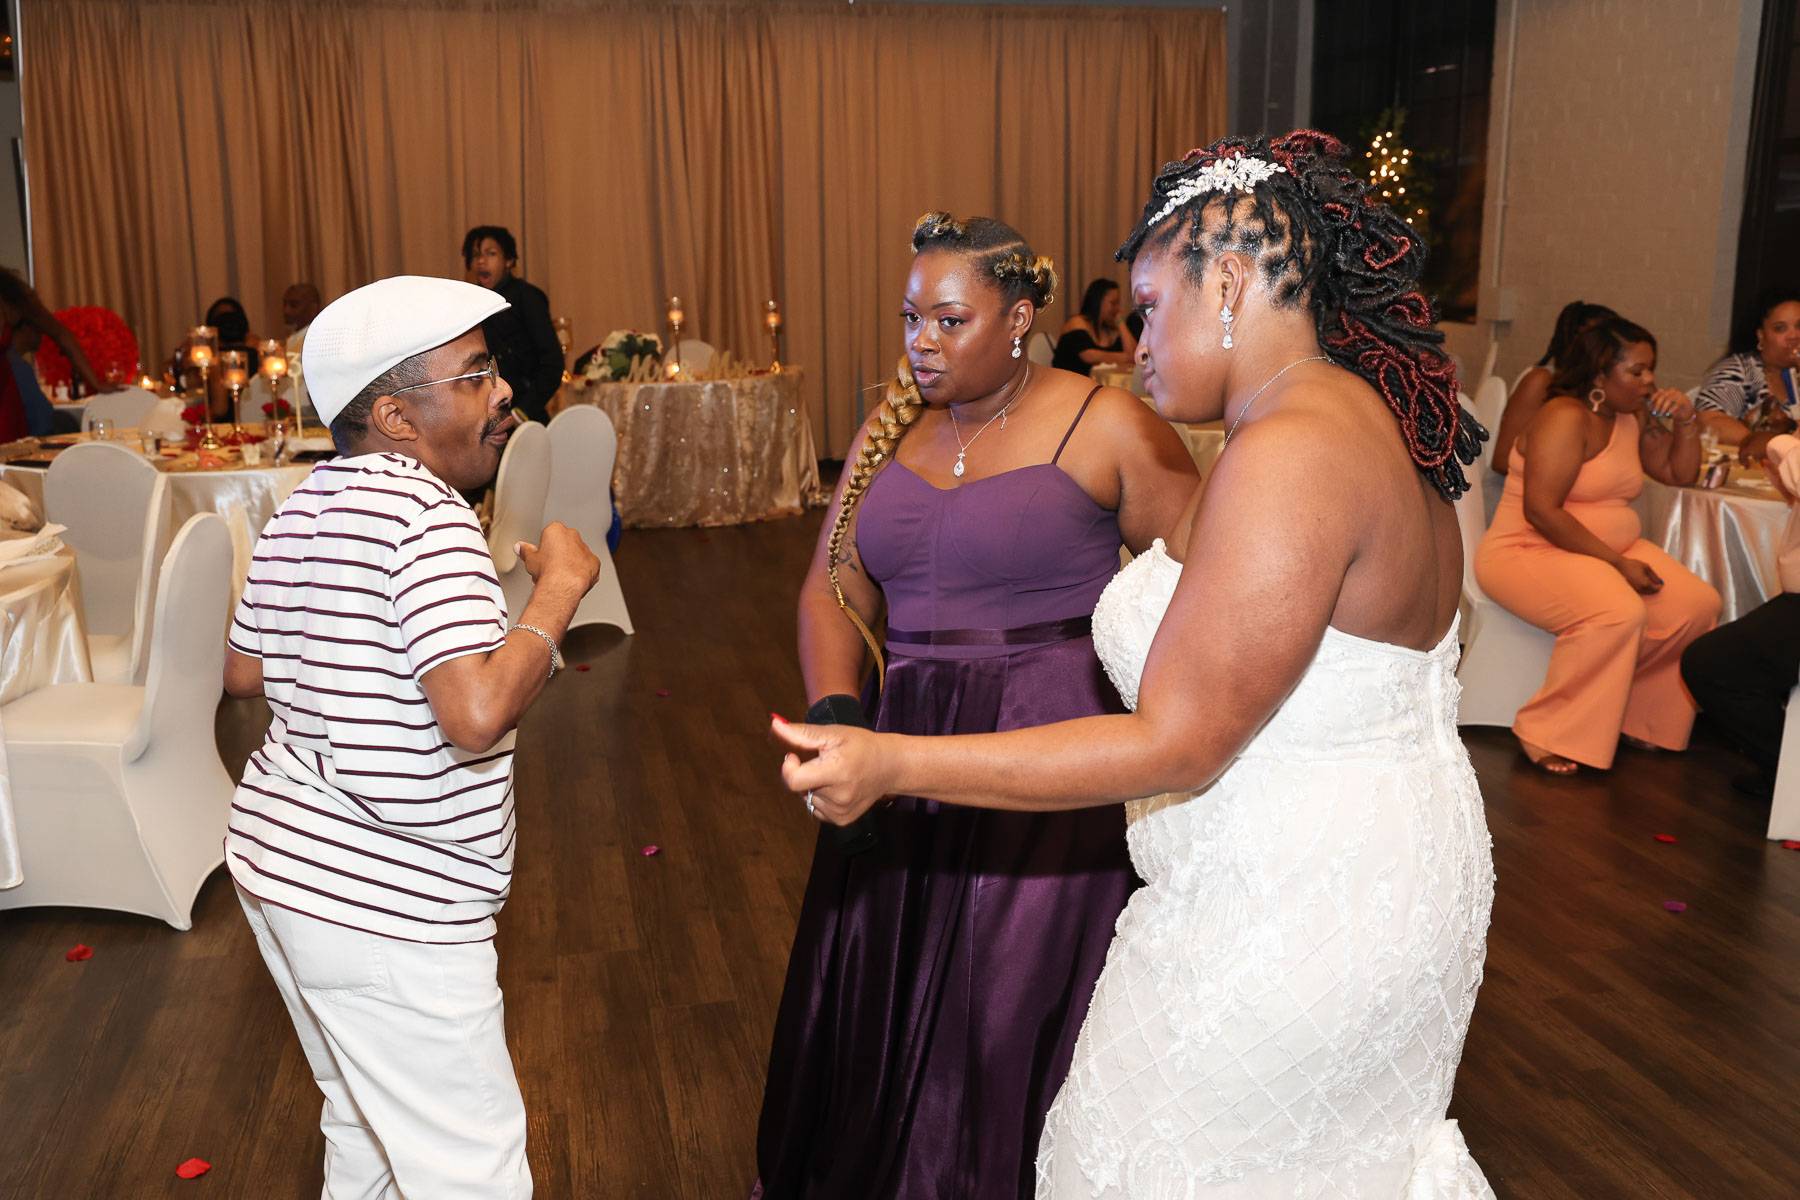 The bride and her two friends dancing